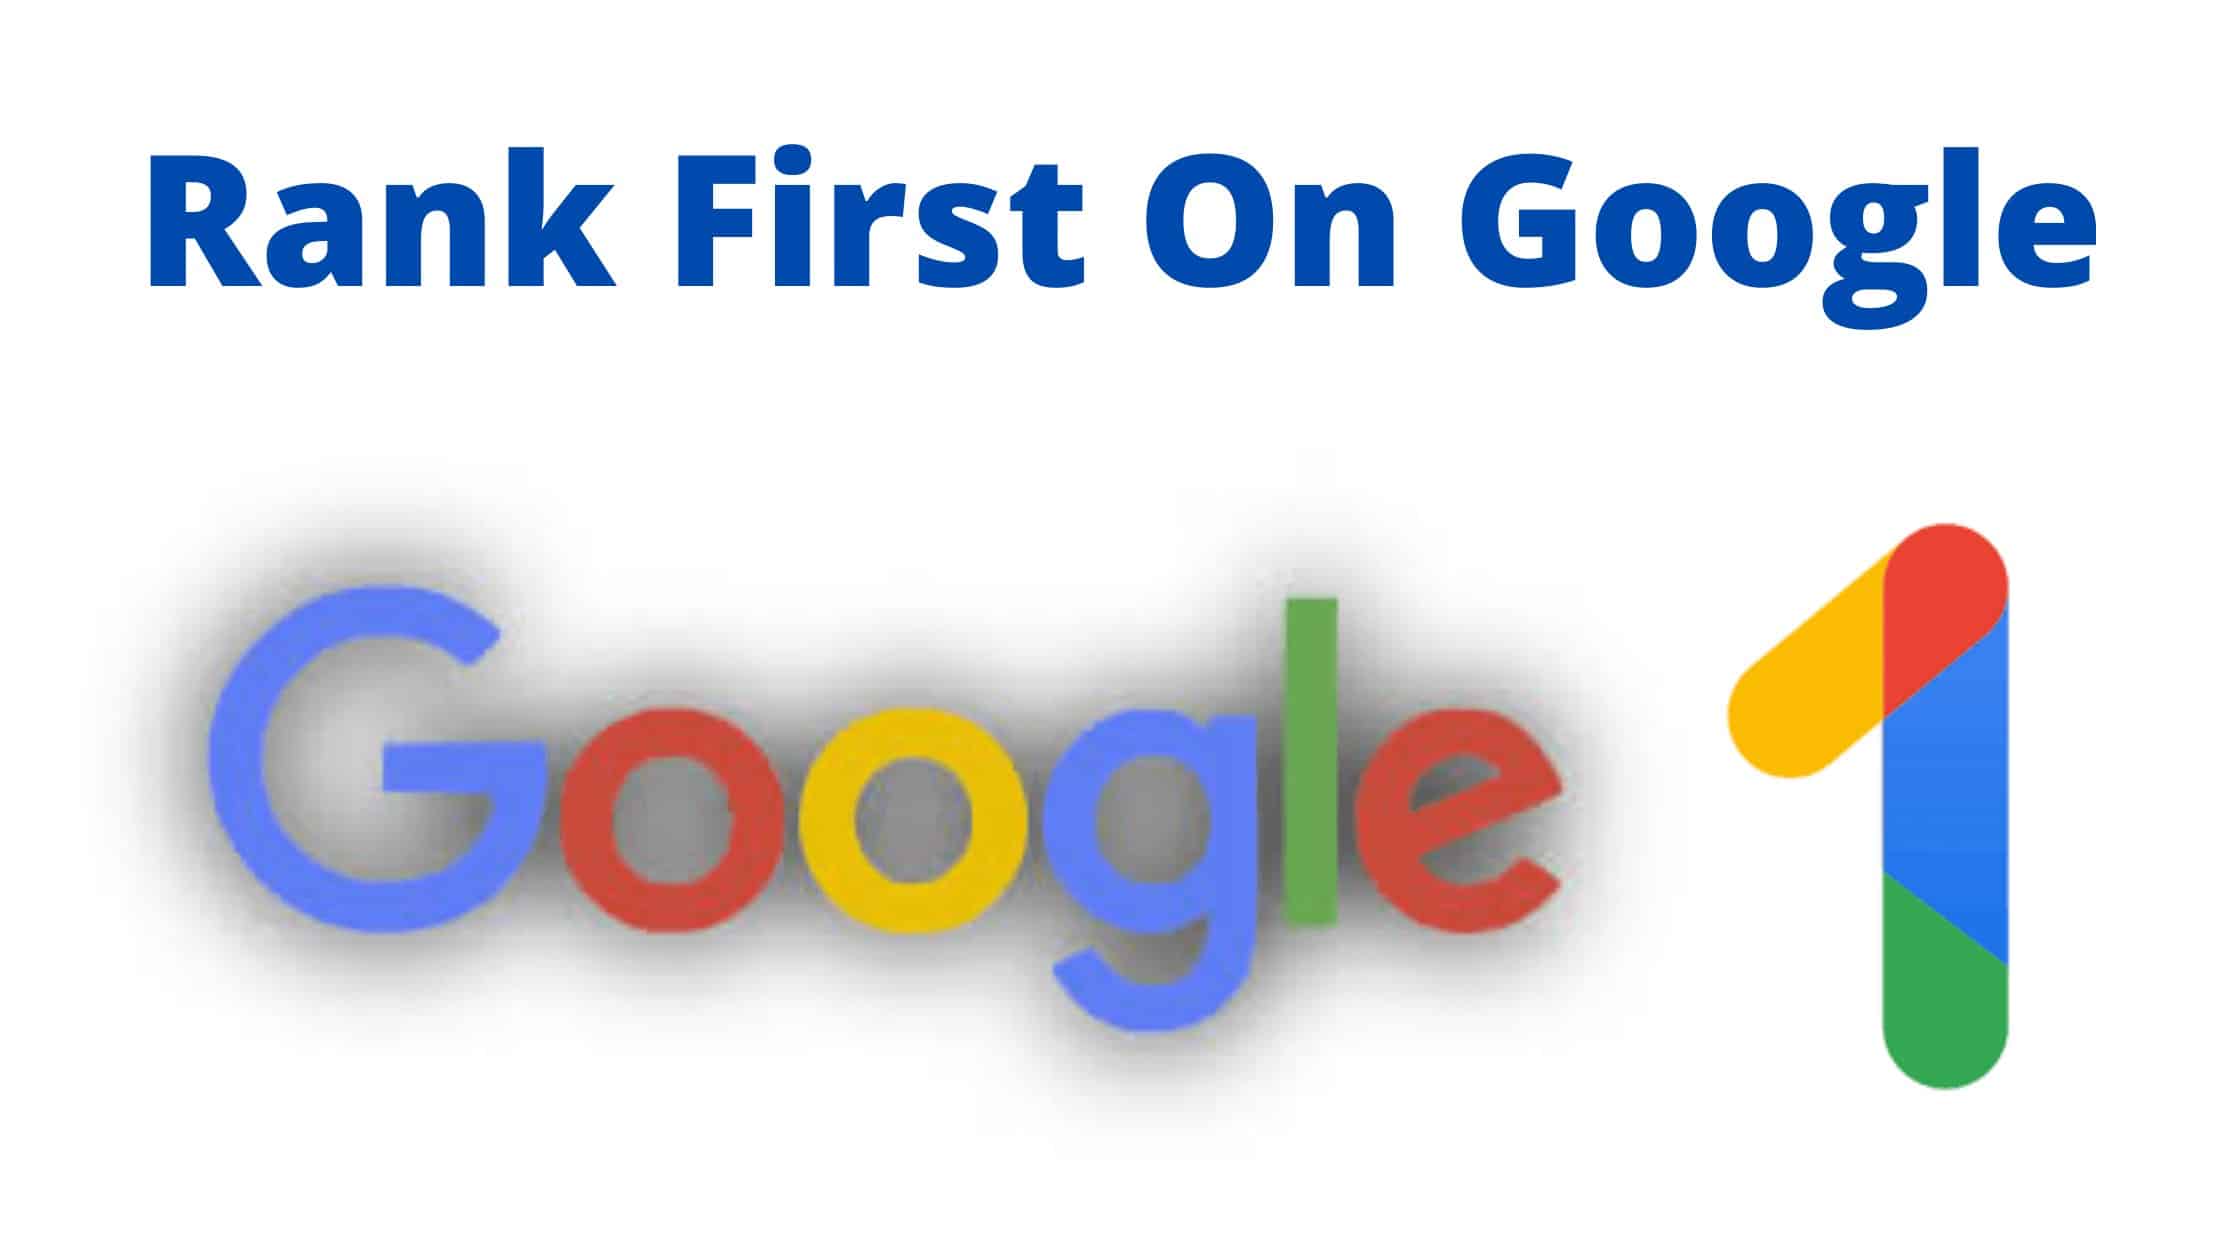 rank your website on Google's first page